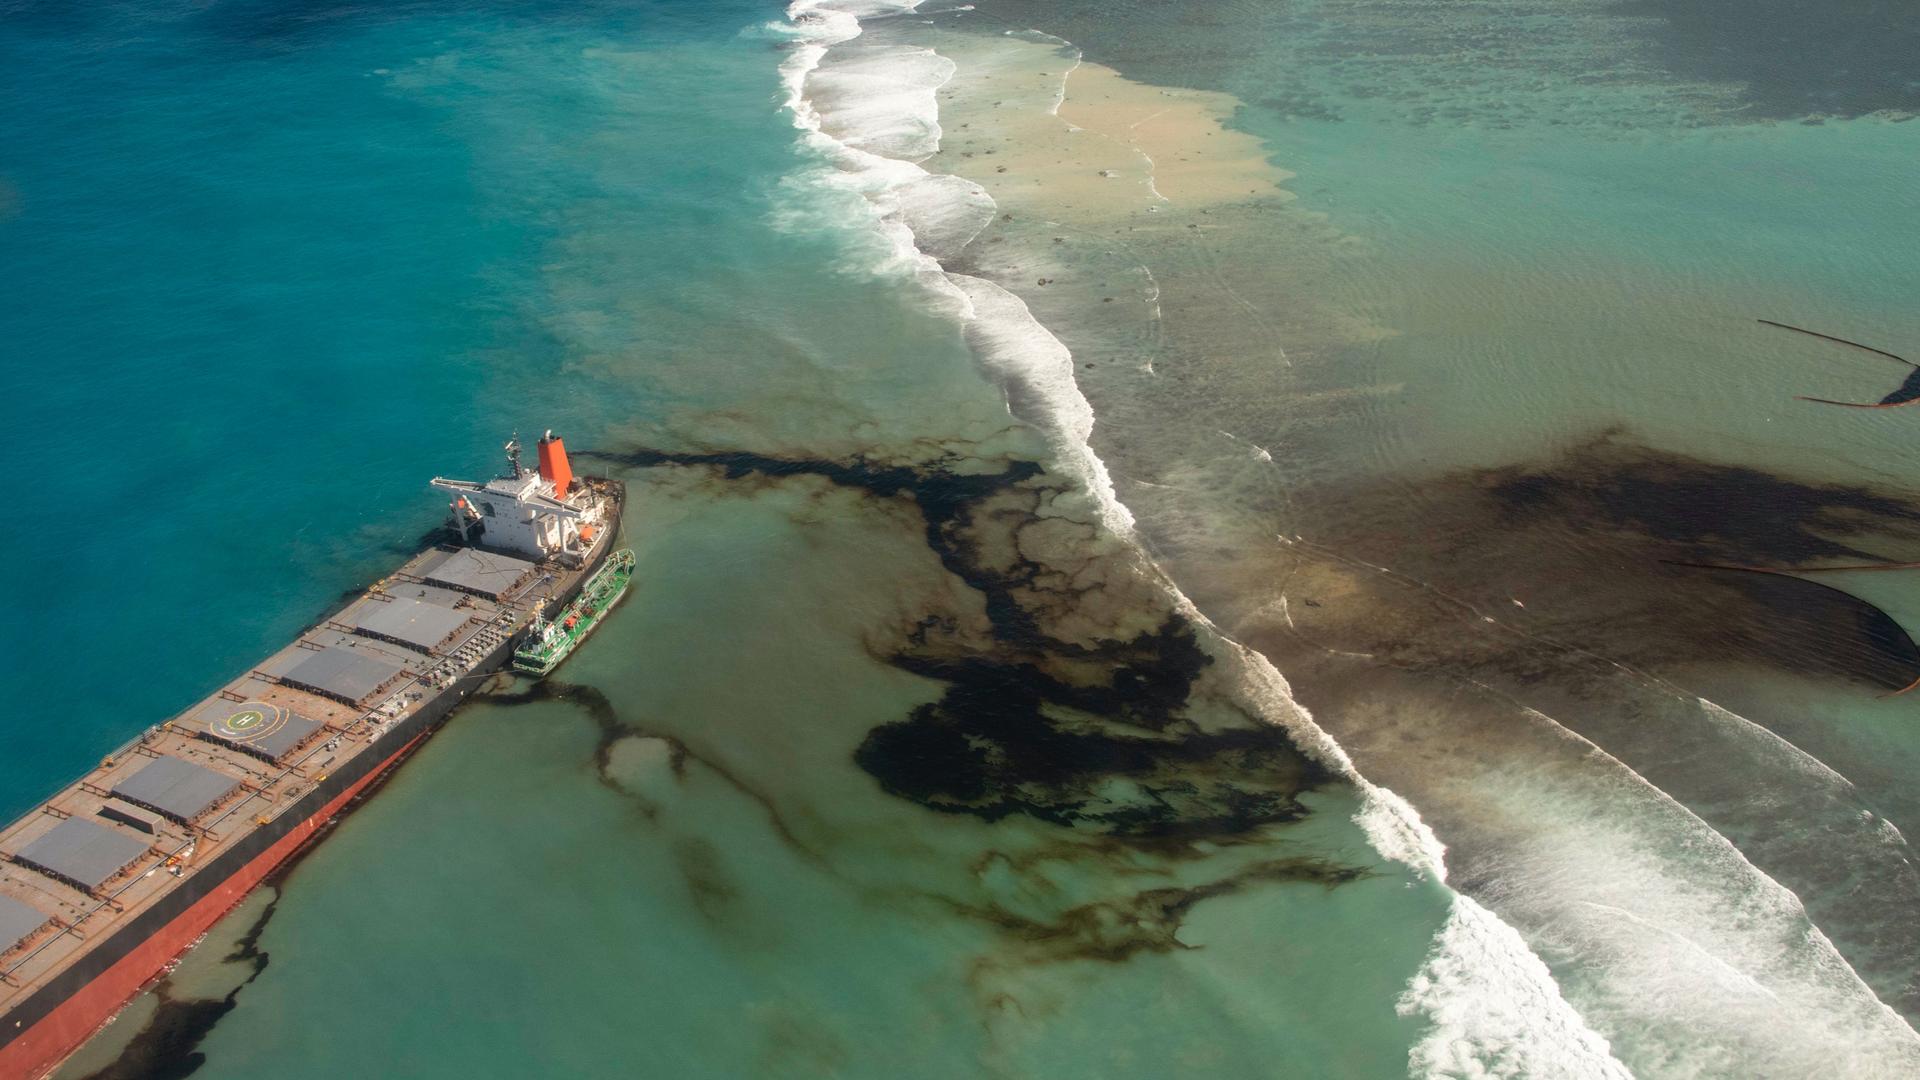 A long, narrow boat leaks black oil into the Indian Ocean off coast of Mauritius blue waters